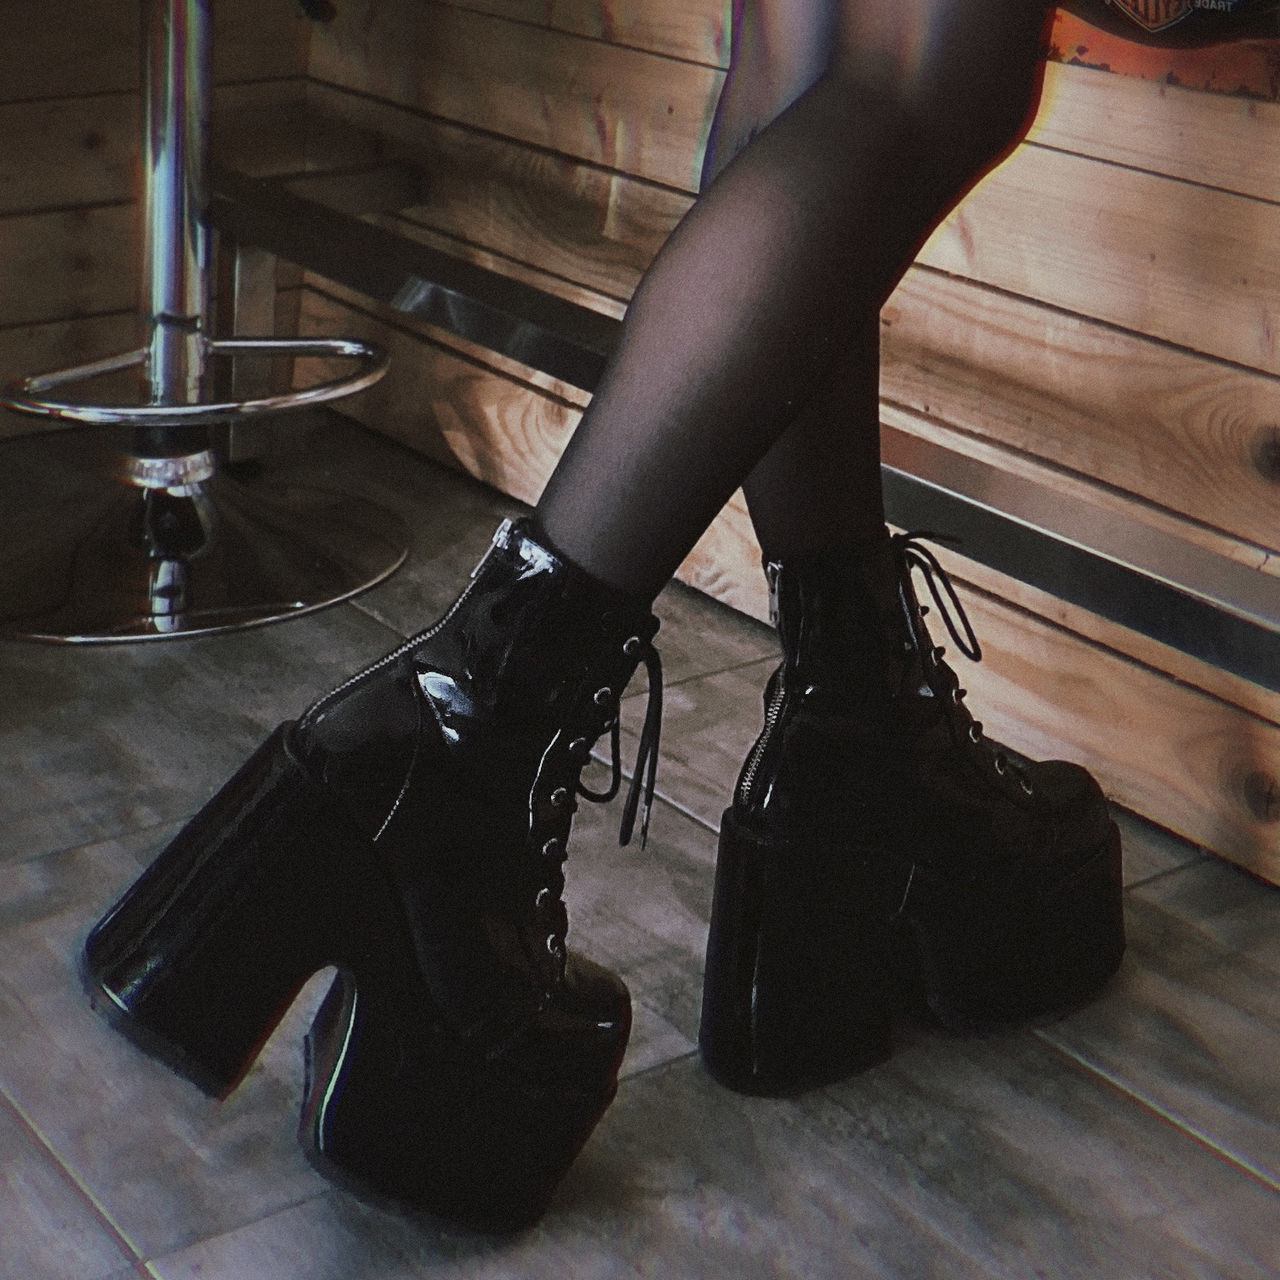 black, human leg, shoe, adult, one person, low section, limb, human limb, high heels, indoors, clothing, women, fashion, flooring, footwear, young adult, lifestyles, pantyhose, fashion accessory, hardwood floor, arts culture and entertainment, human foot, stiletto, tights, person